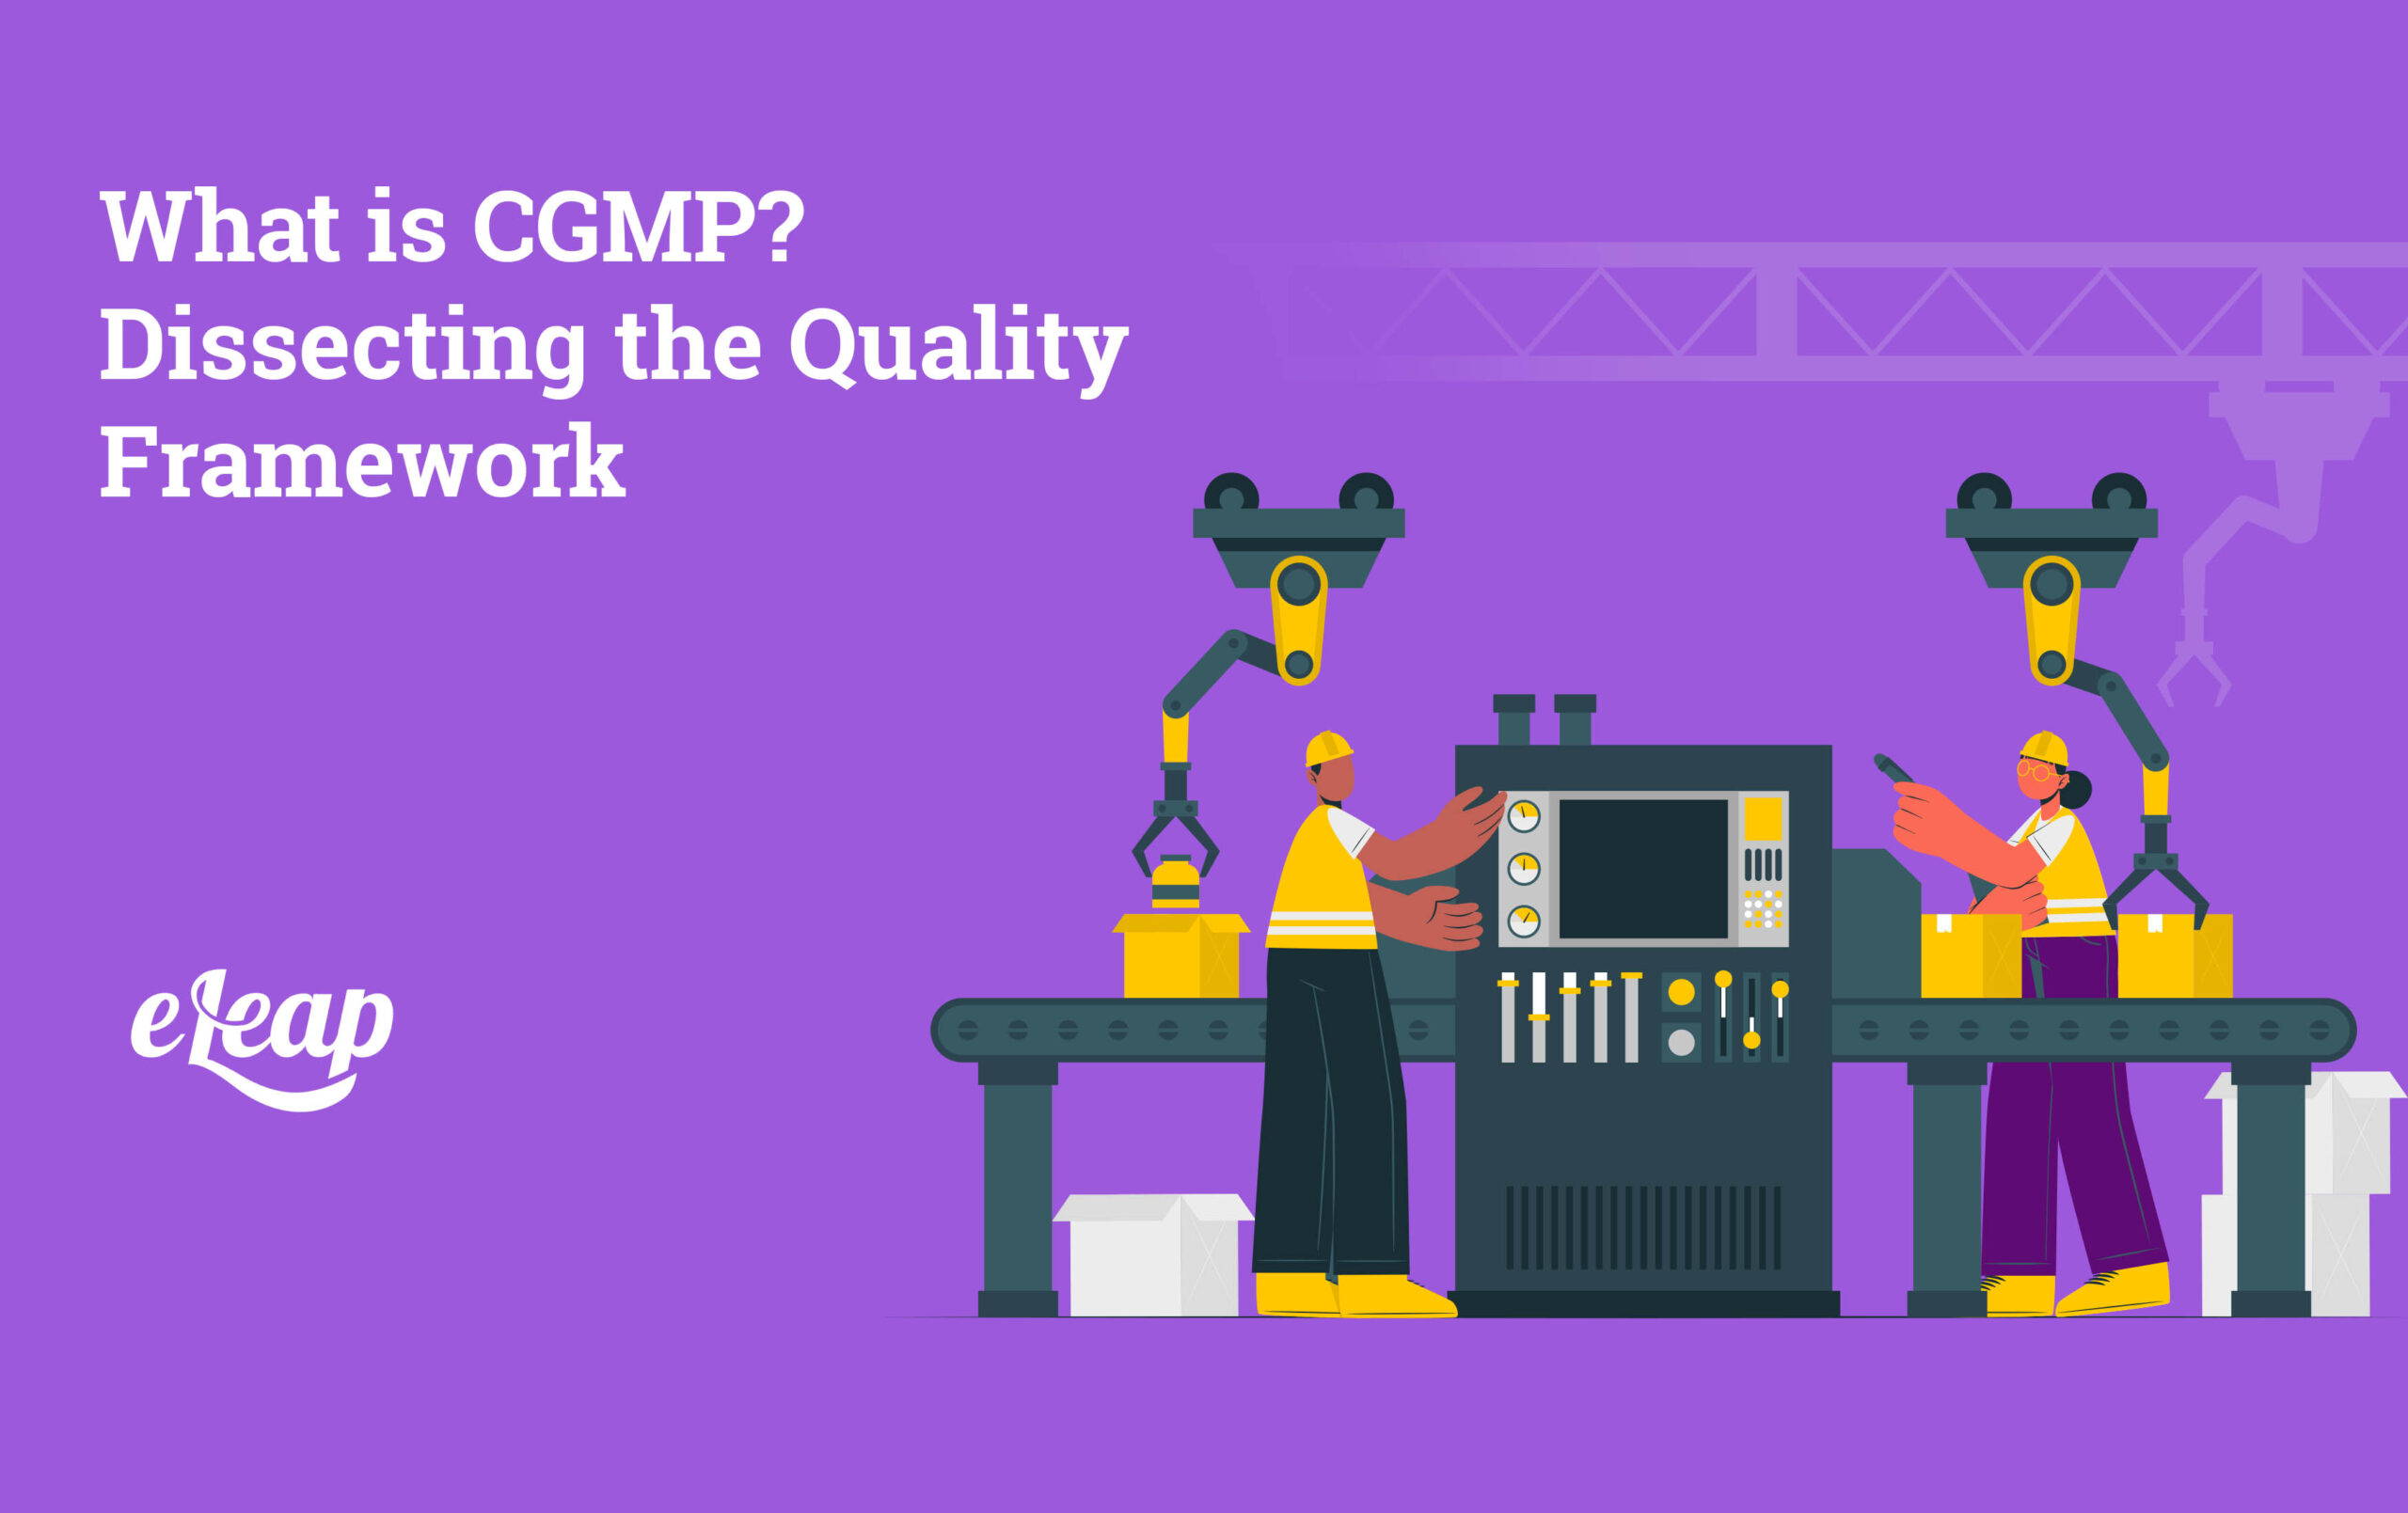 What is CGMP? Dissecting the Quality Framework